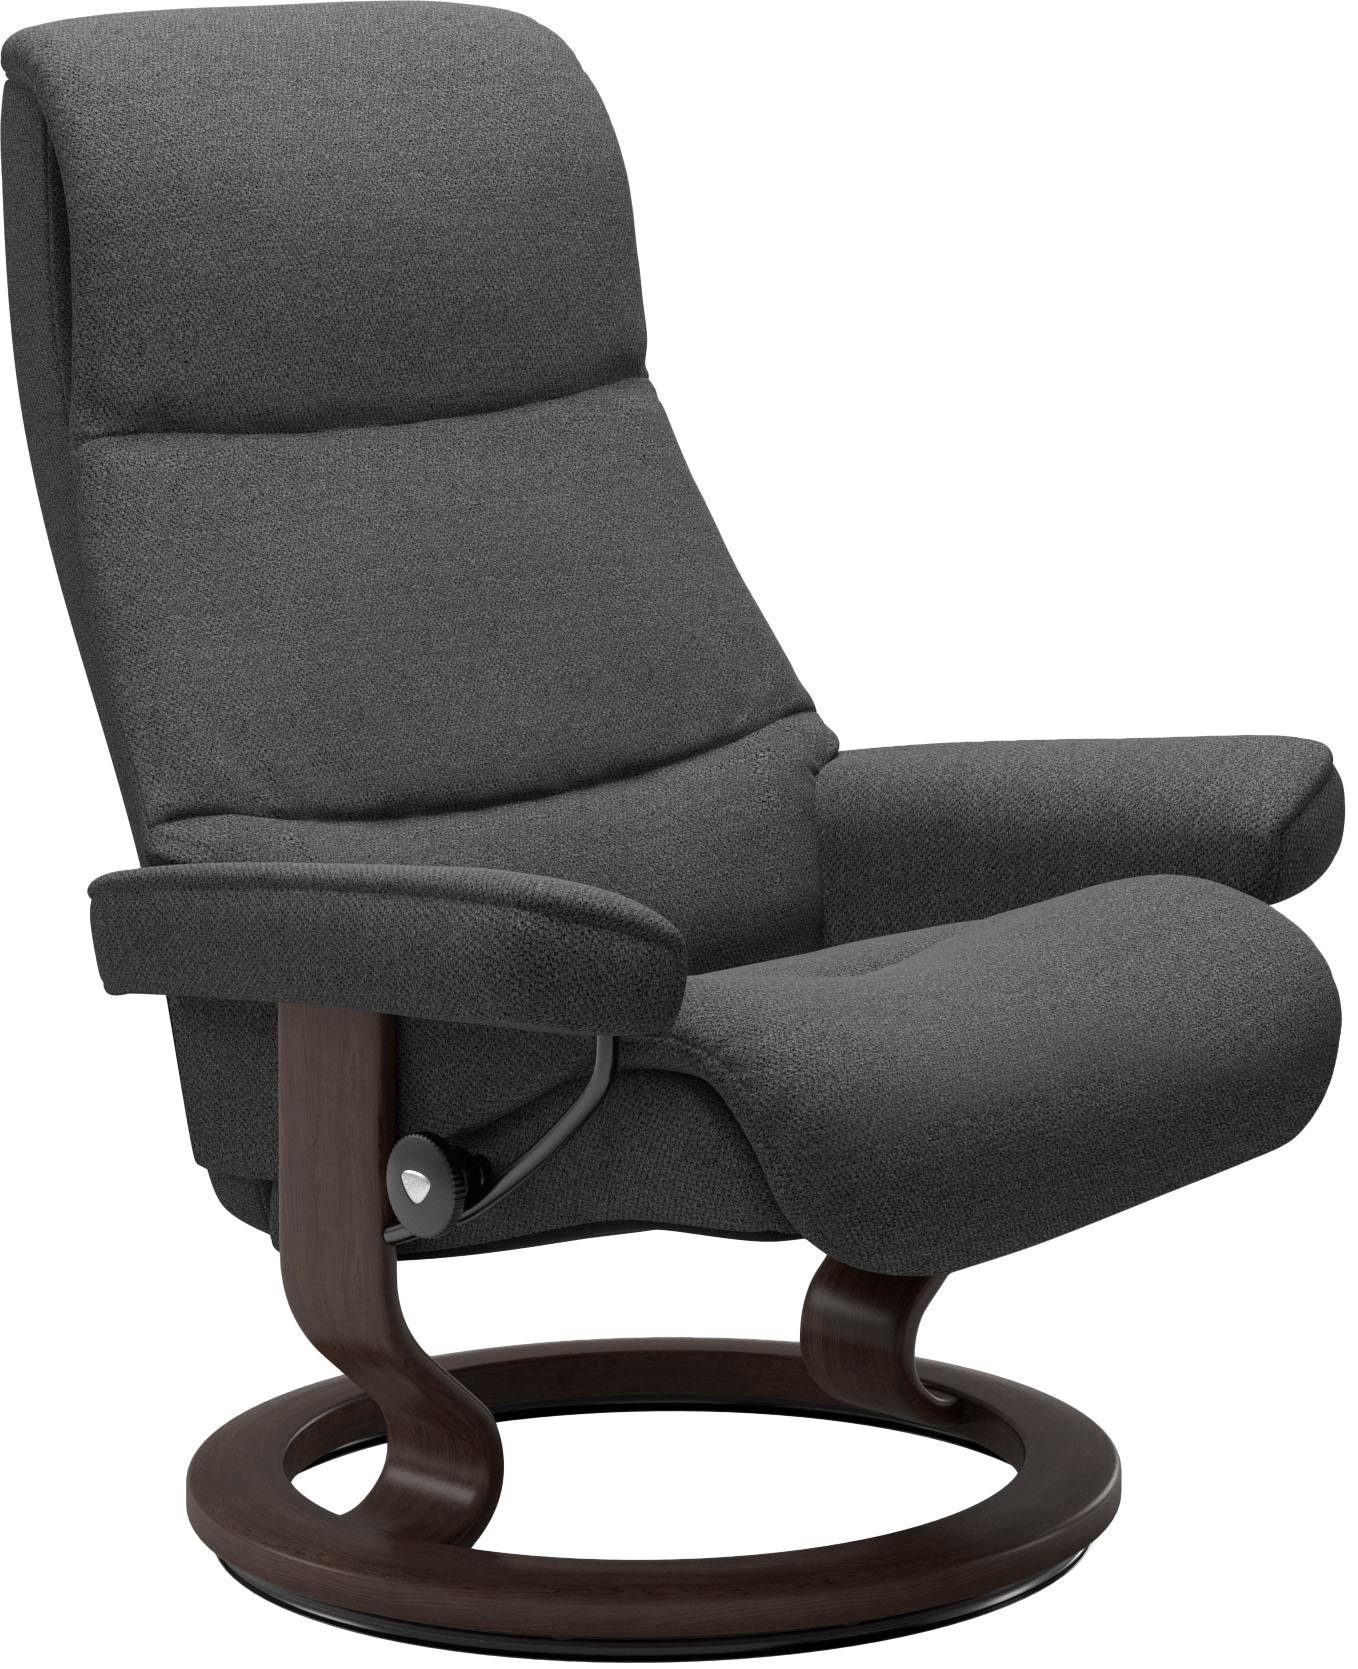 Classic Base, View, L,Gestell Größe Relaxsessel mit Stressless® Wenge